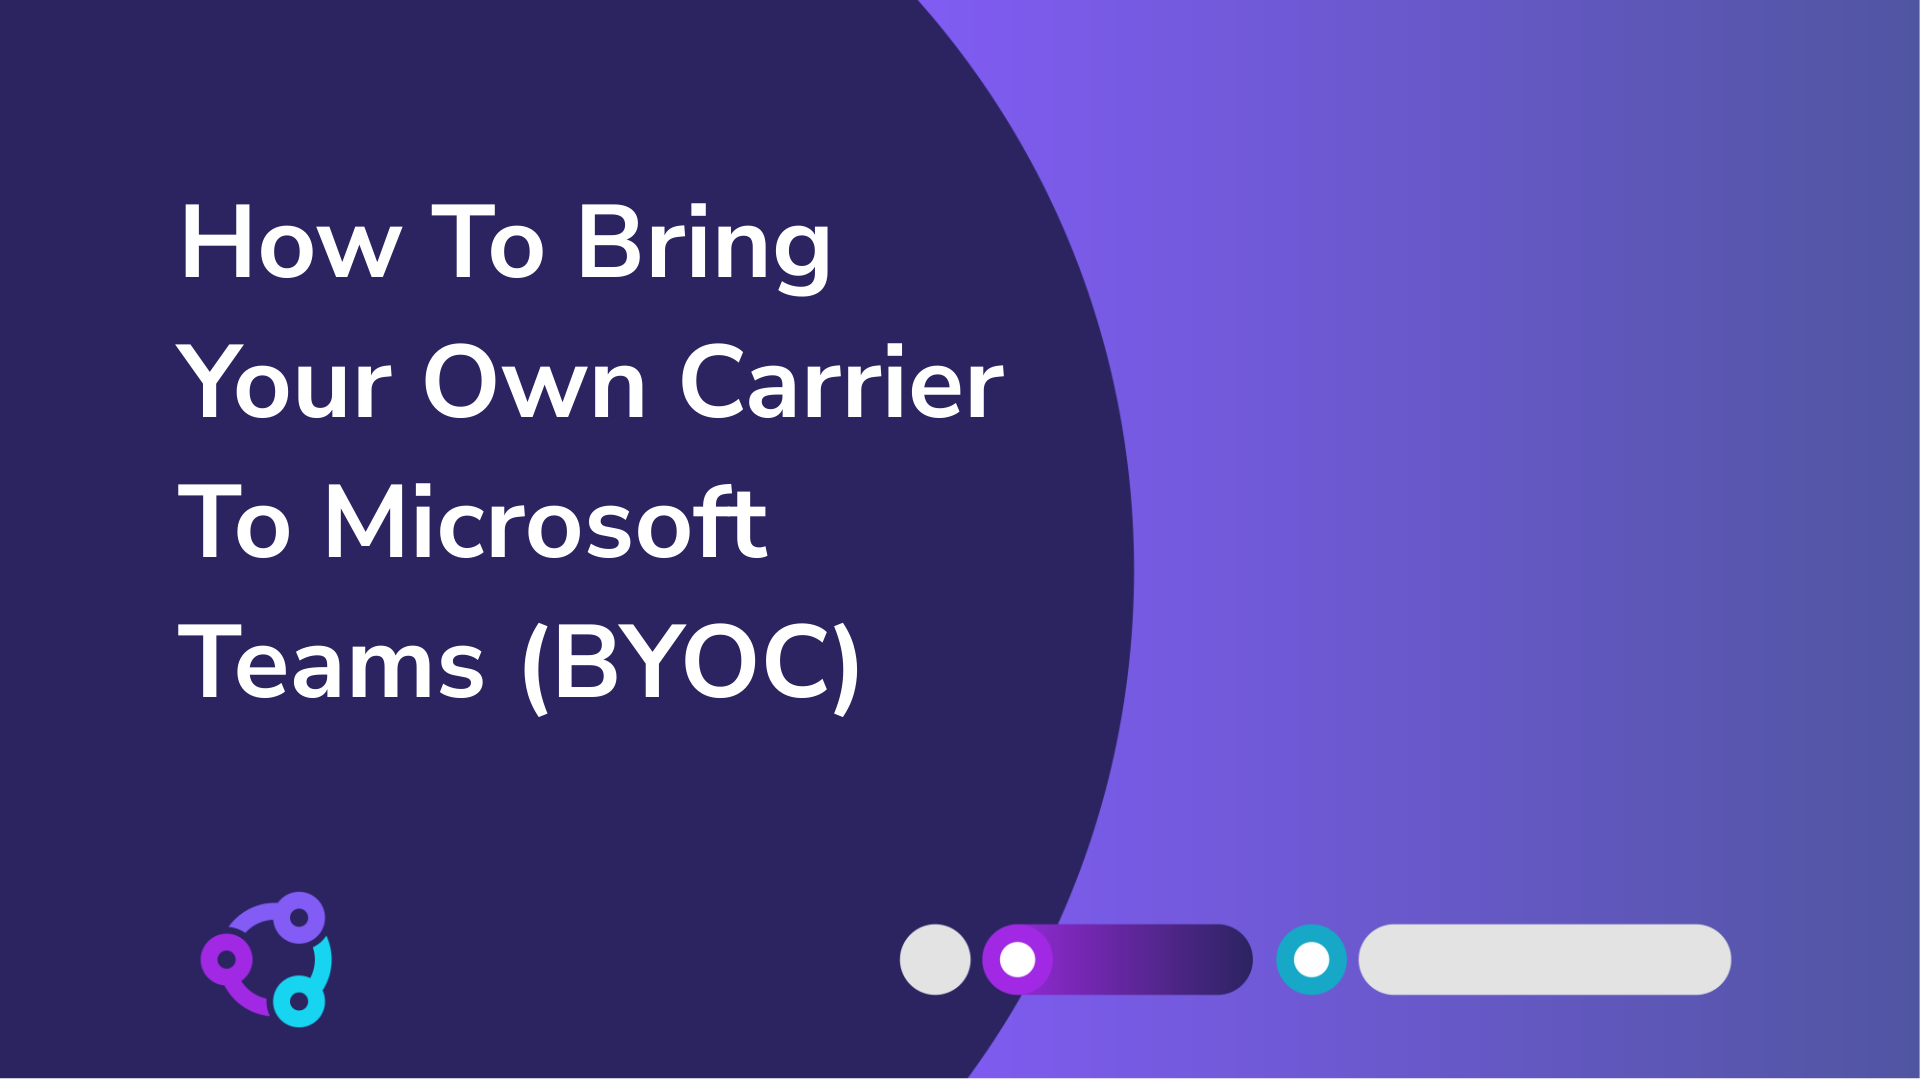 How To Bring Your Own Carrier To Microsoft Teams (BYOC) 